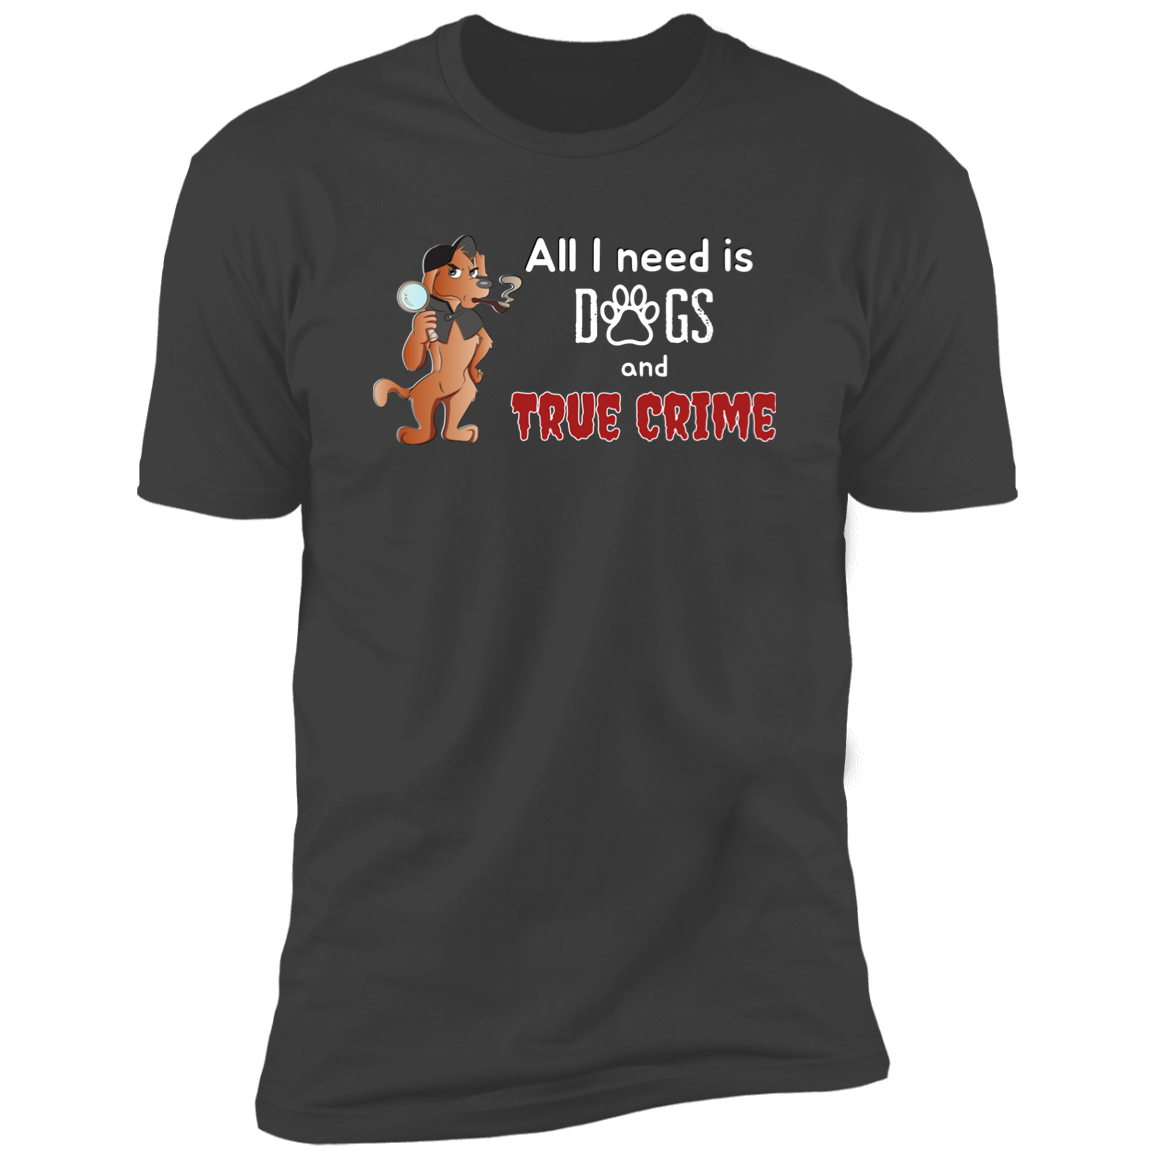 All I Need is Dogs and True Crime, Dog shirt for humas, in heavy metal gray